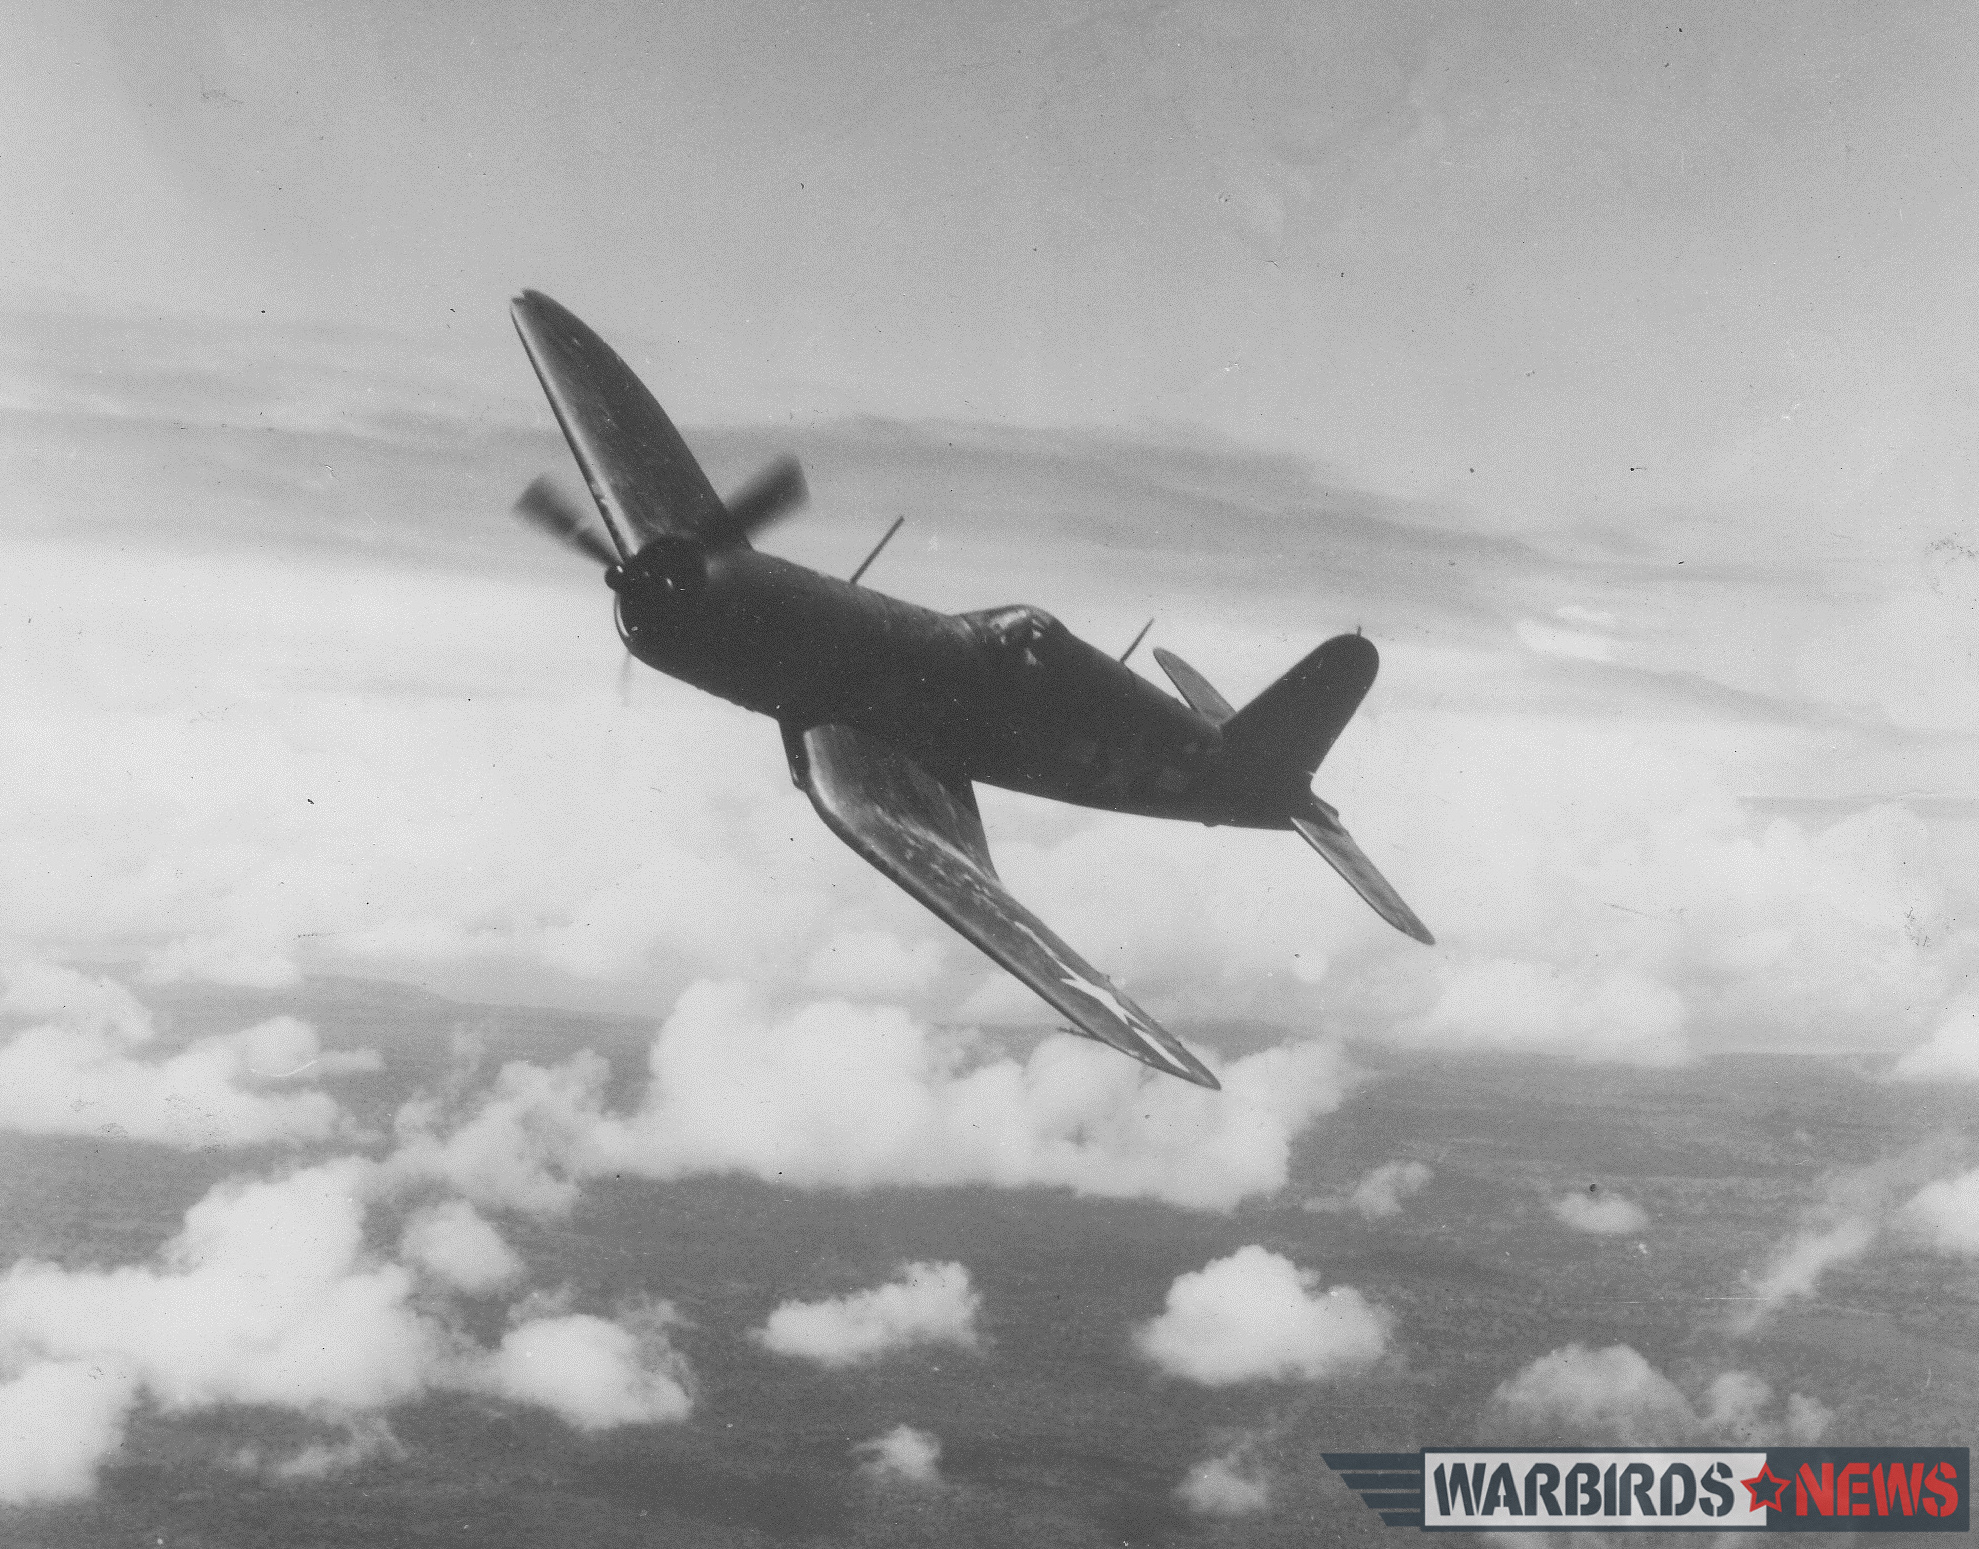 With its distinctive gull wing and long cylindrical fuselage, the F4U Corsair had the visual appeal and panache of a thoroughbred race horse. Combined with its high speed, superb gun package, ruggedness, and external armament options, the Corsair was arguably the best single-engine fighter in the Pacific theater. Many survived combat encounters with extensive damage, yet brought their pilots safely back to base. Photo credit: Bruce Gamble via Frank Walton